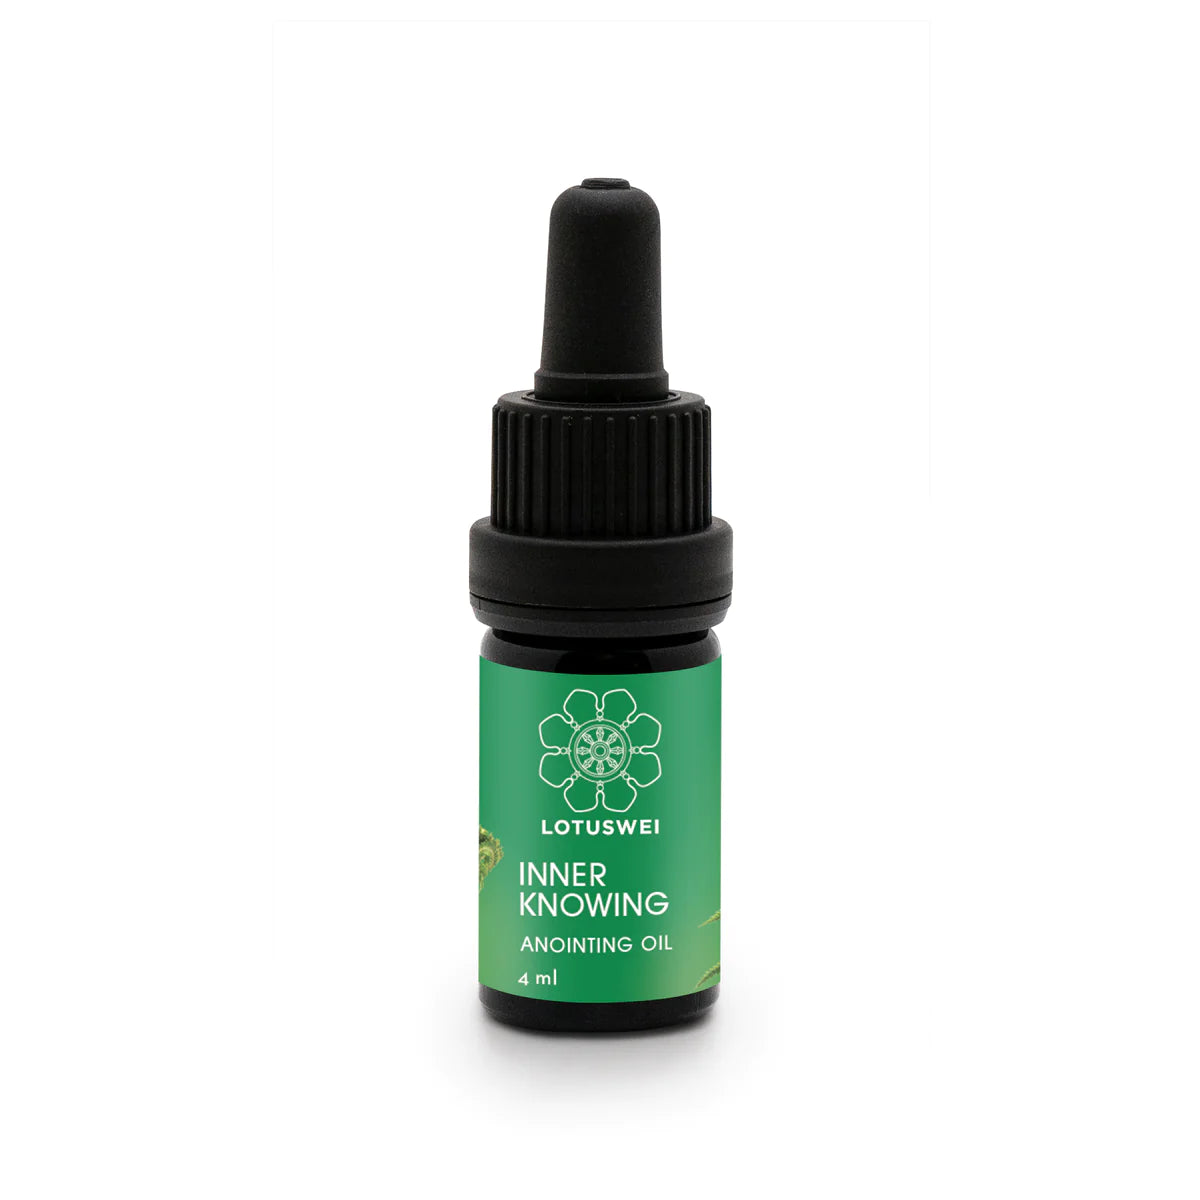 Lotuswei- Inner Knowing:  Anointing Oil